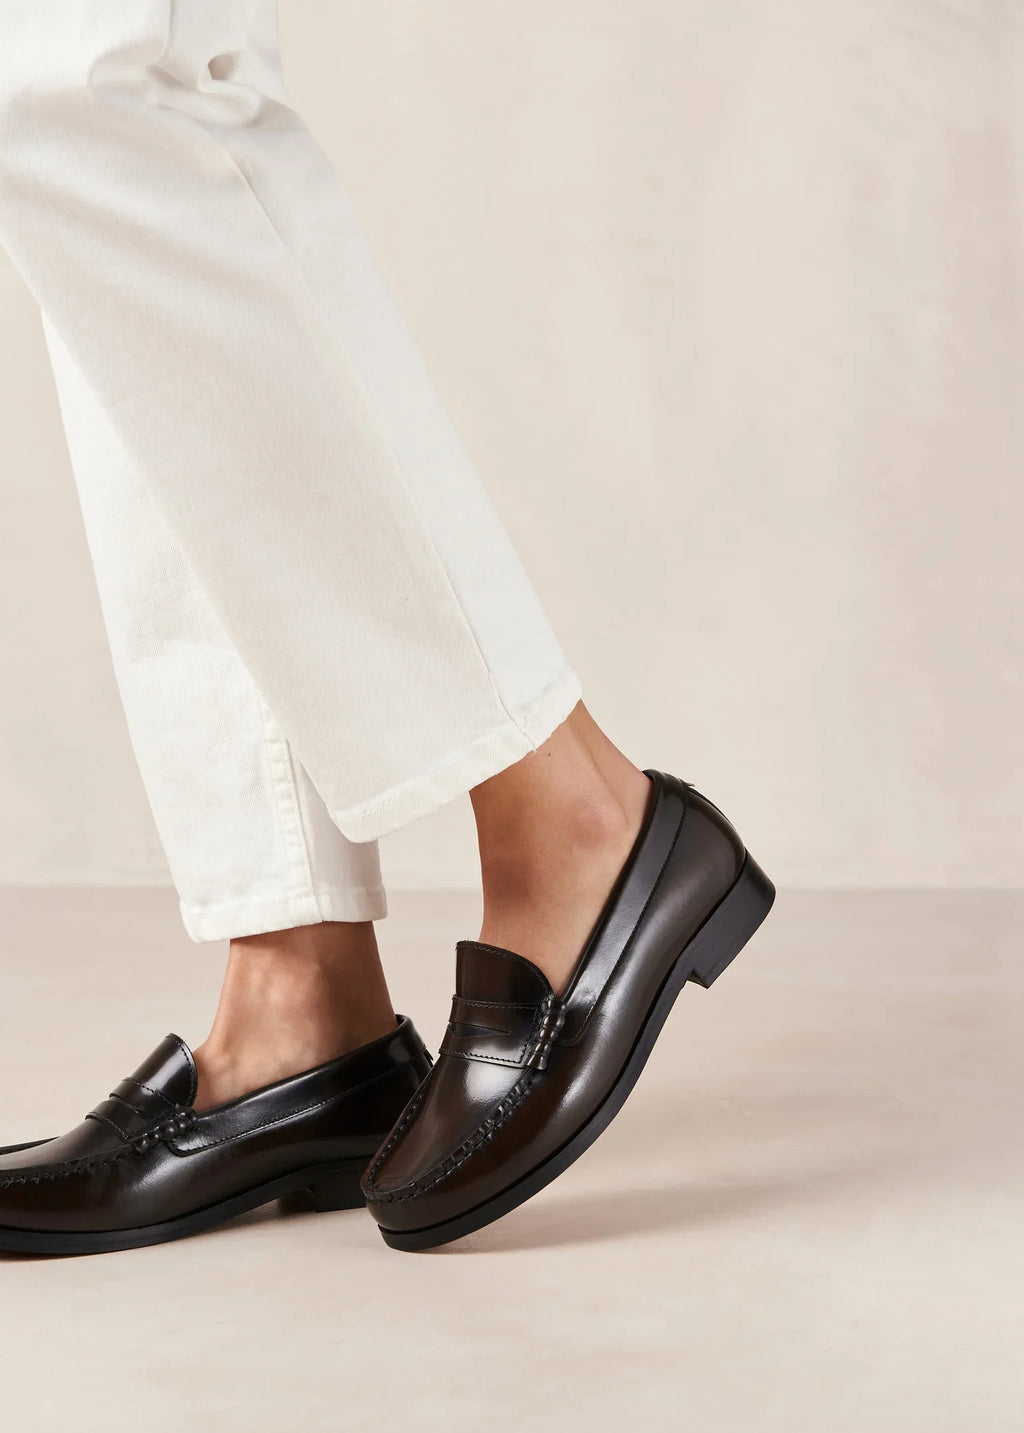 ALOHAS RIVET LOAFERS / BROWN LEATHER